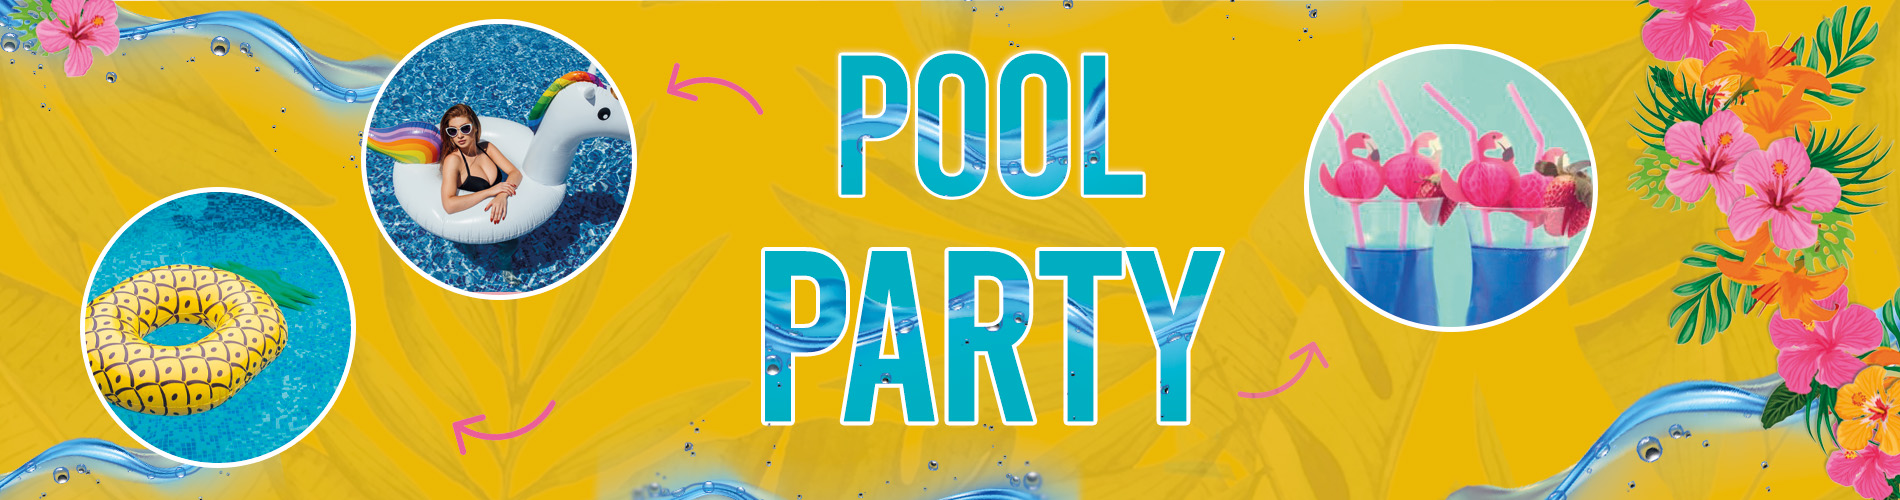 Banner Pool Party